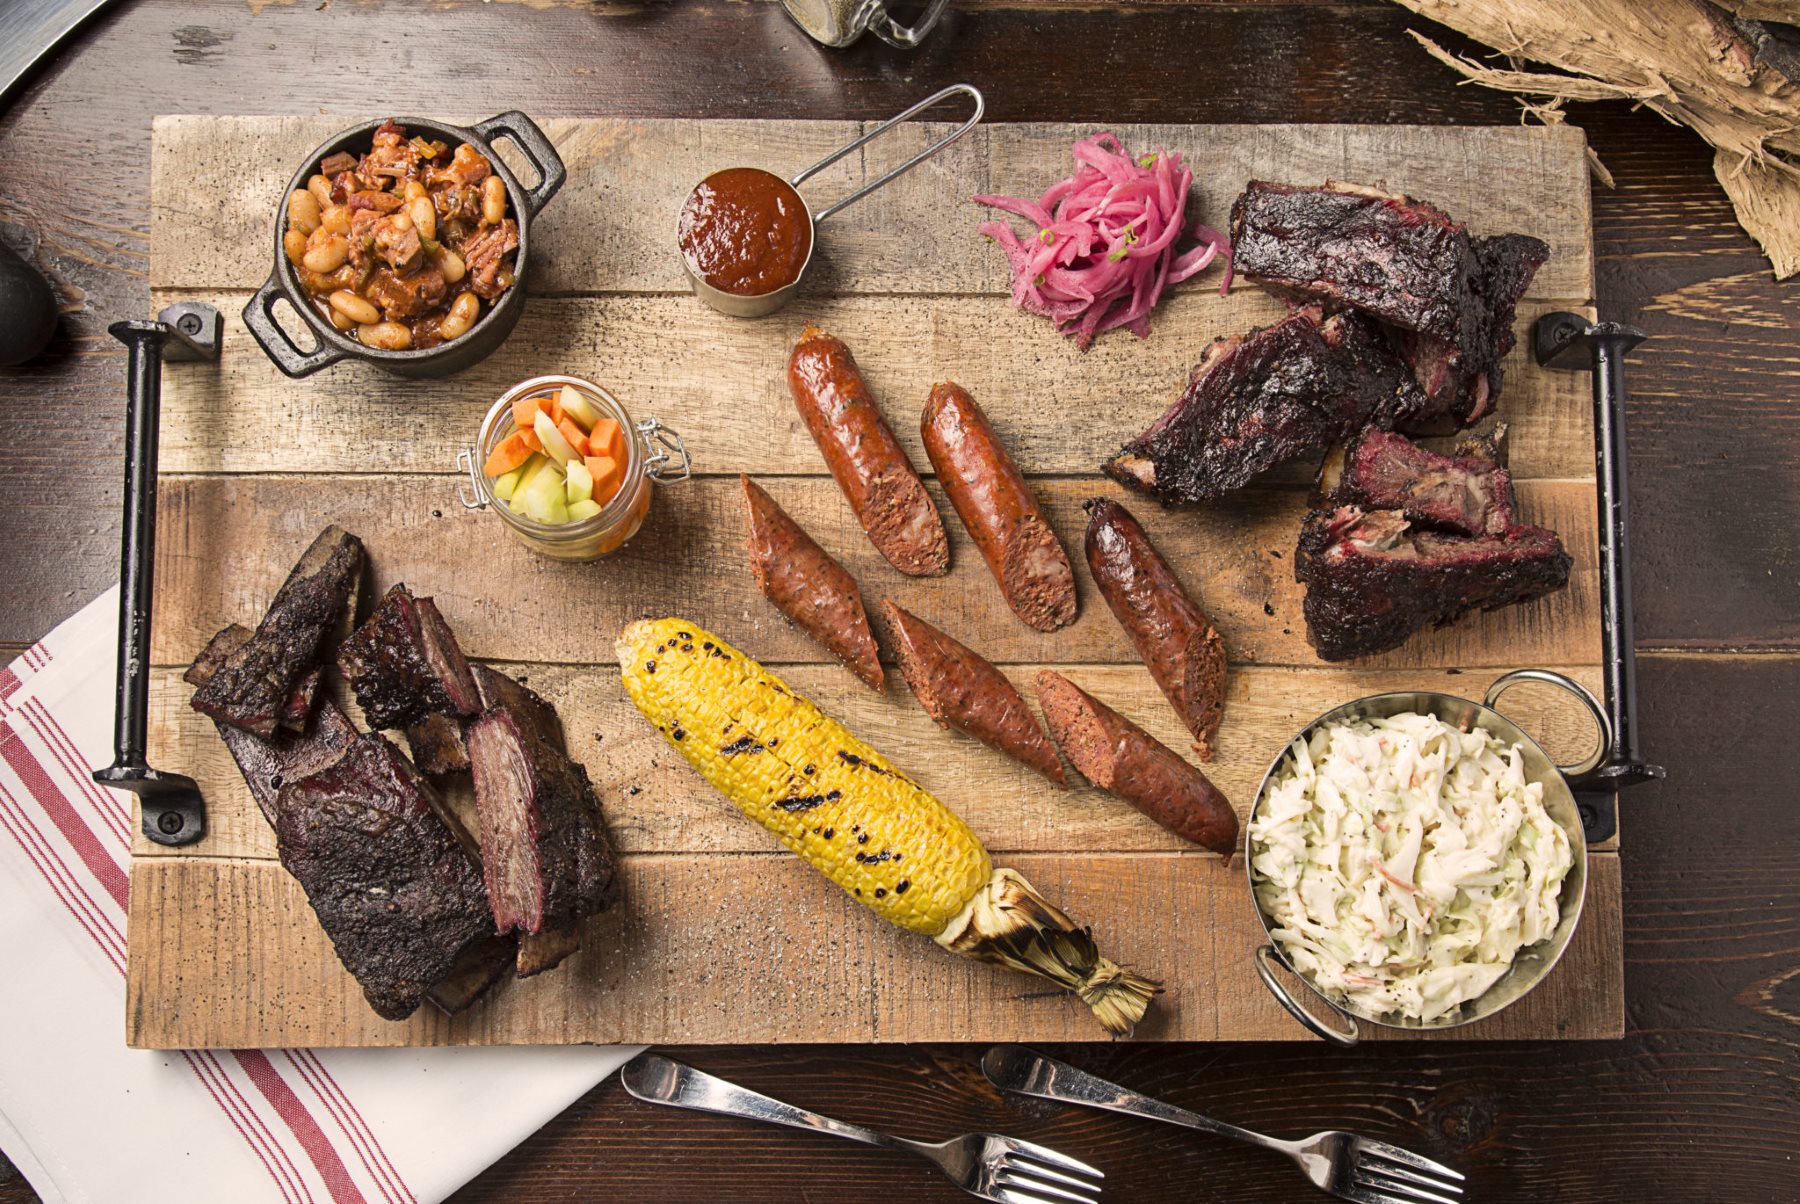 Fuego is Miami best barbecue steakhouse and smokehouse